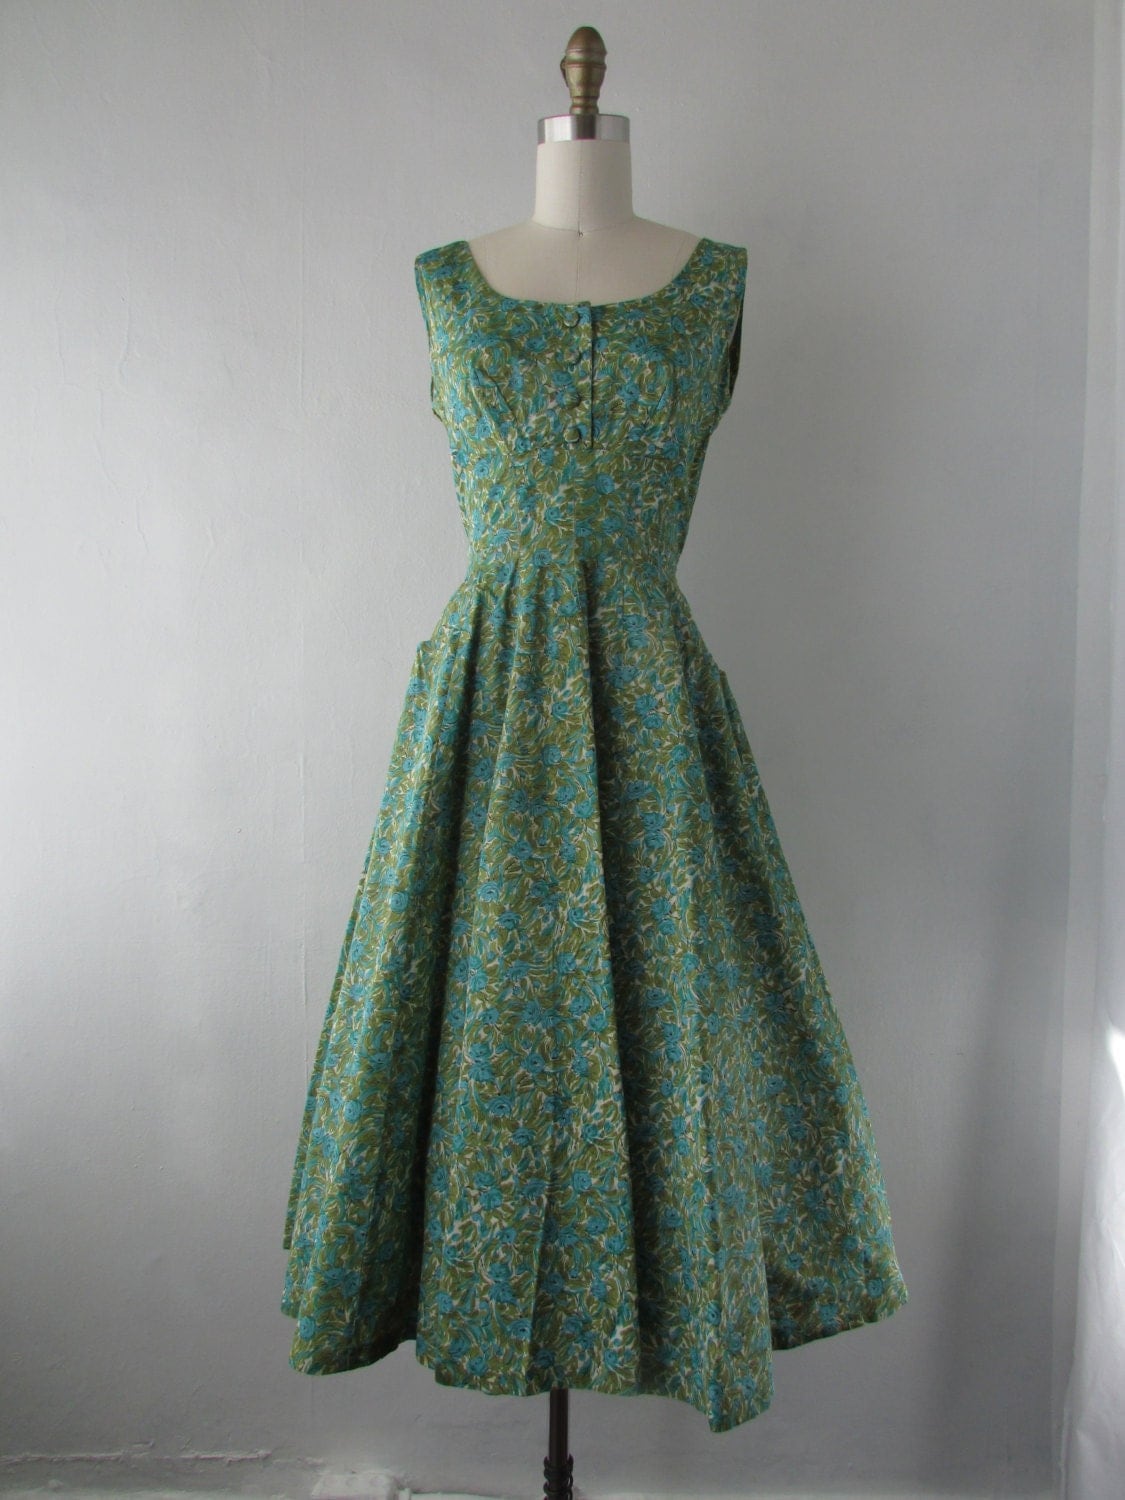 1950s day dress 1950s blue and green floral dress Small